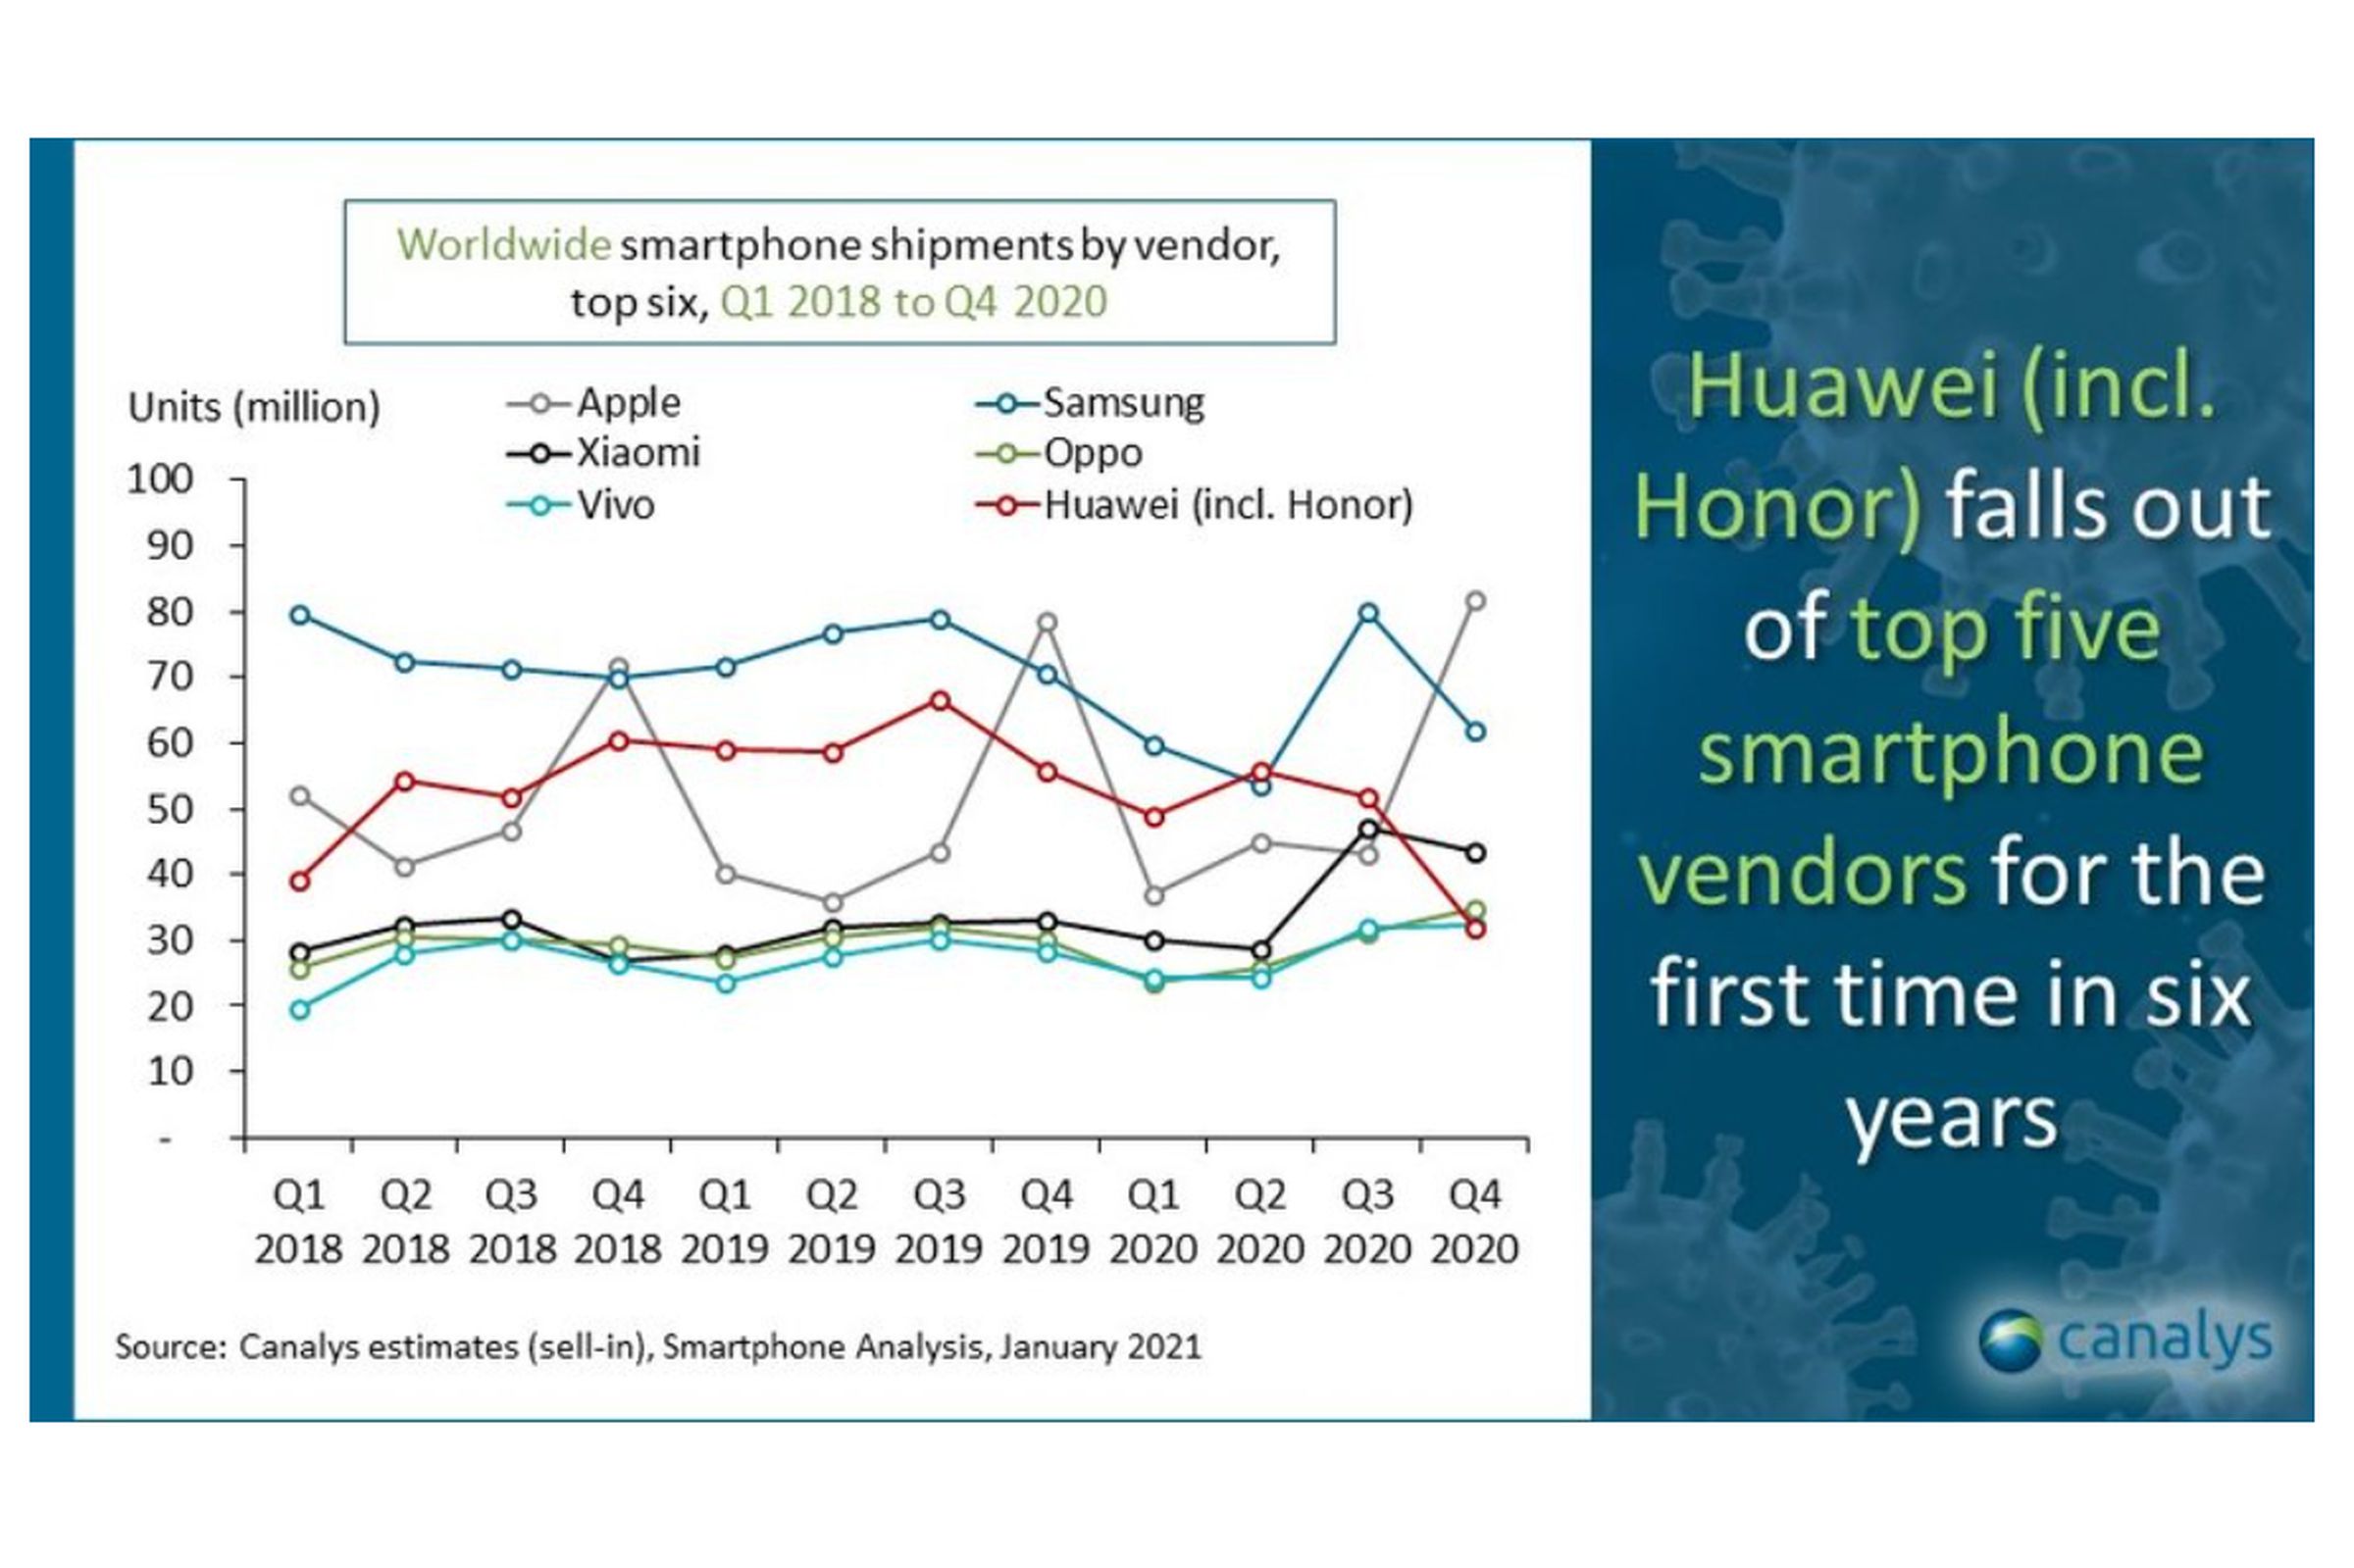 Huawei’s smartphone shipments dropped out of the top five in Q4 2020.